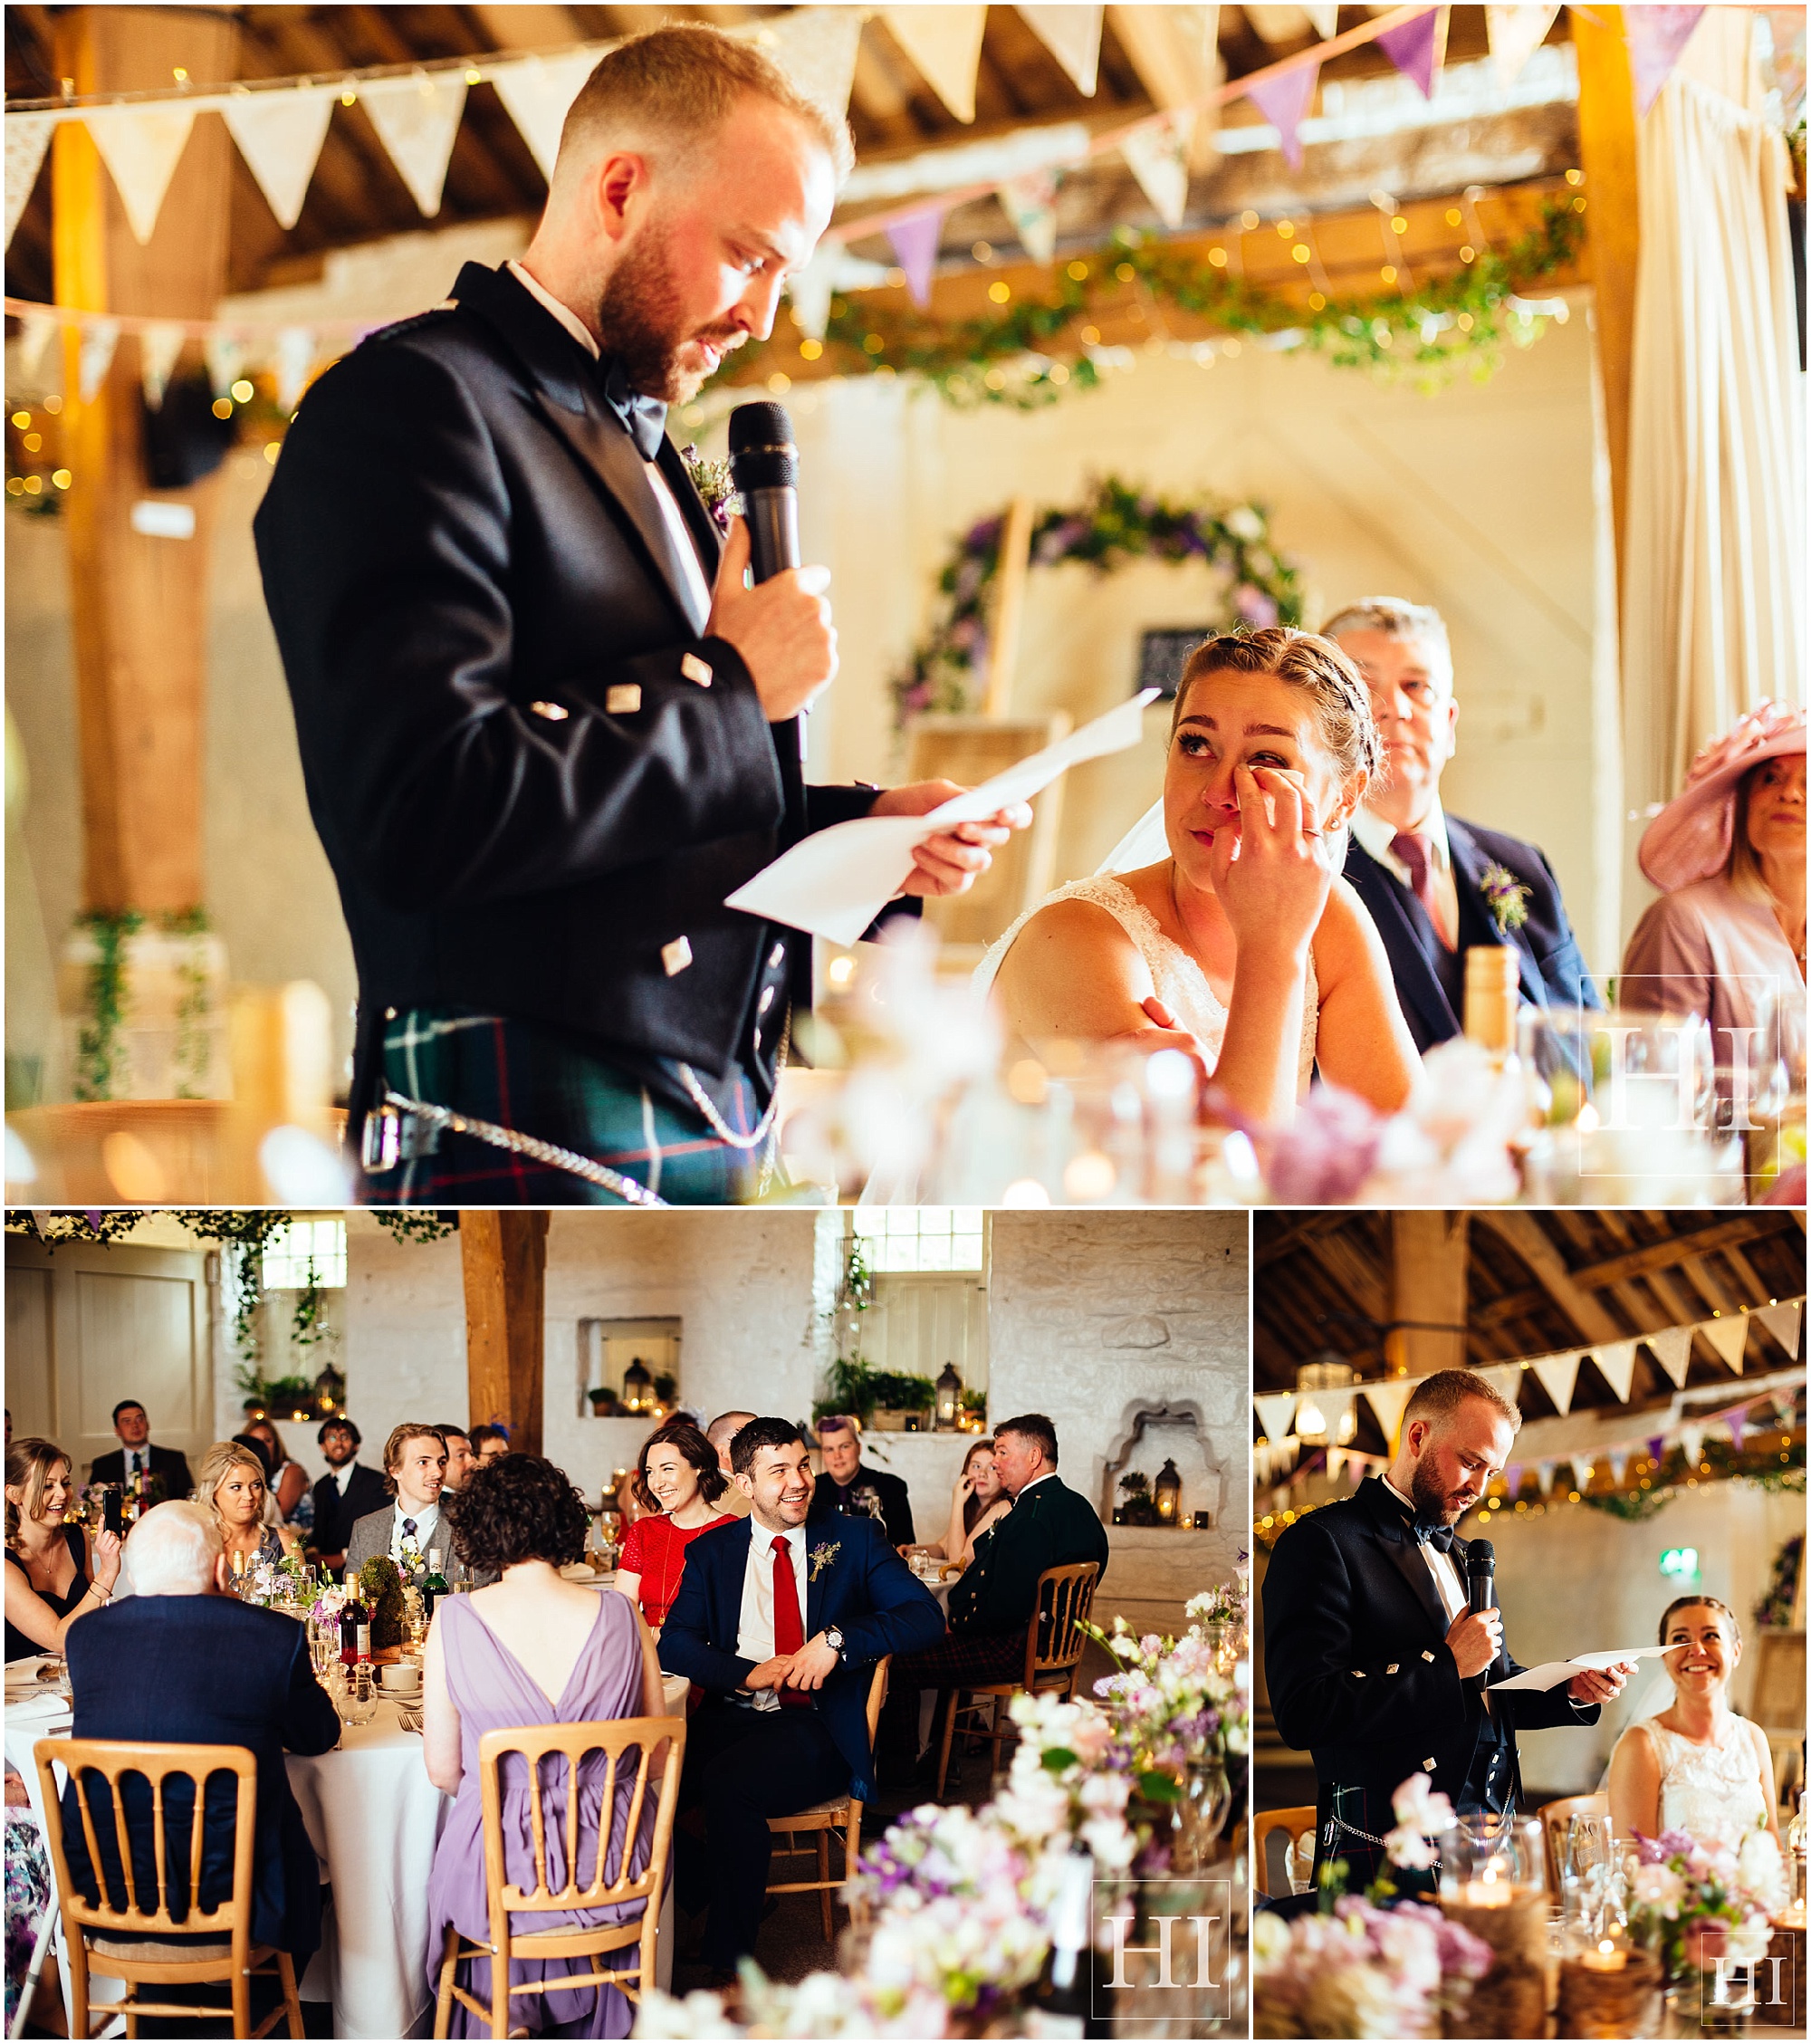 East Riddlesden Hall Wedding Photography Hamish Irvine Kate Ross National Trust Nomad Catering Leeds Keighey Photographer London Destination 